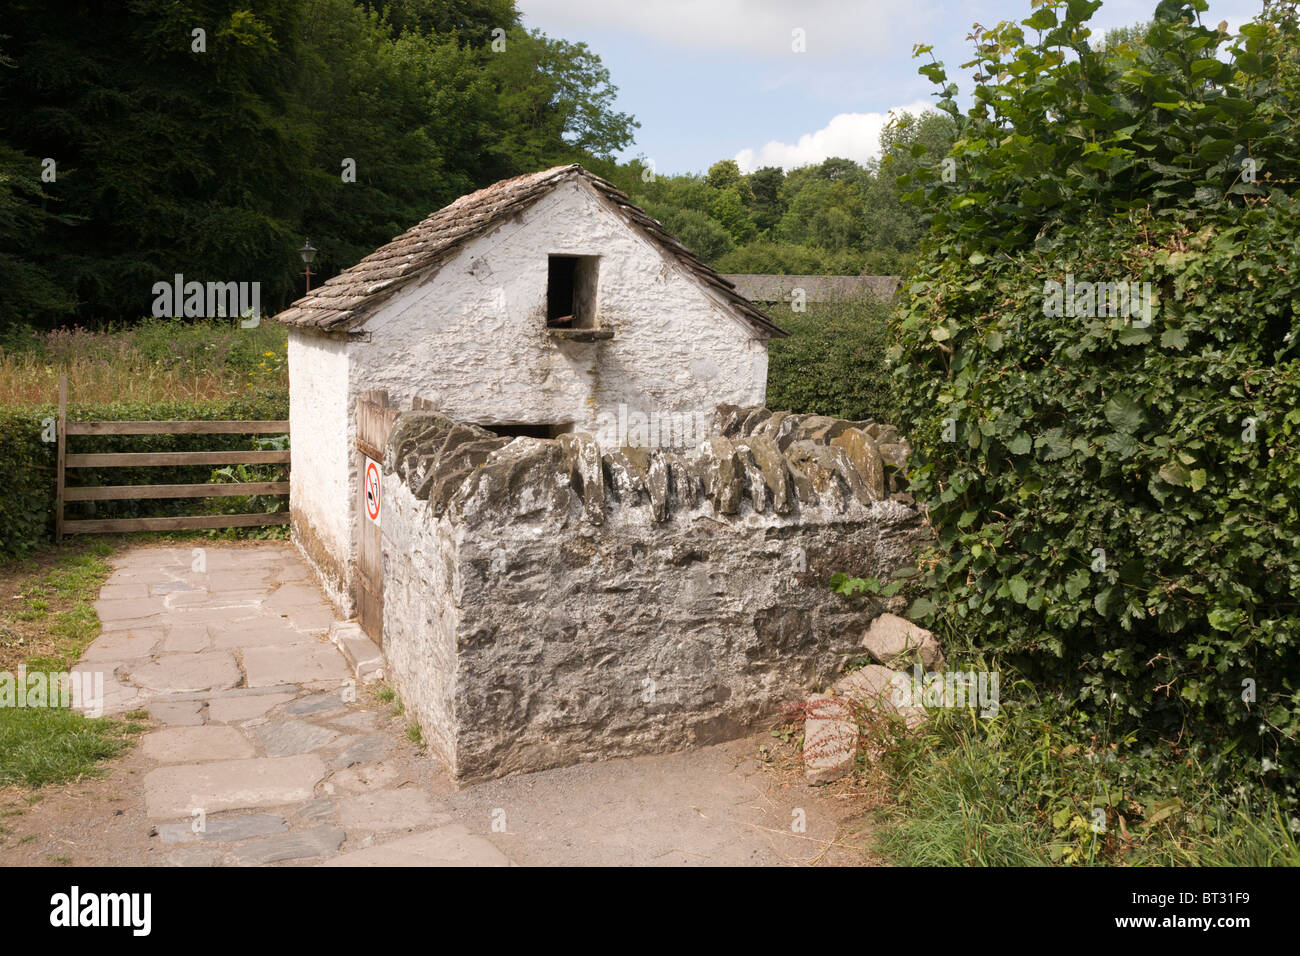 St Fagans Museum of Historical Buildings, Wales. Pig Sty Stock Photo